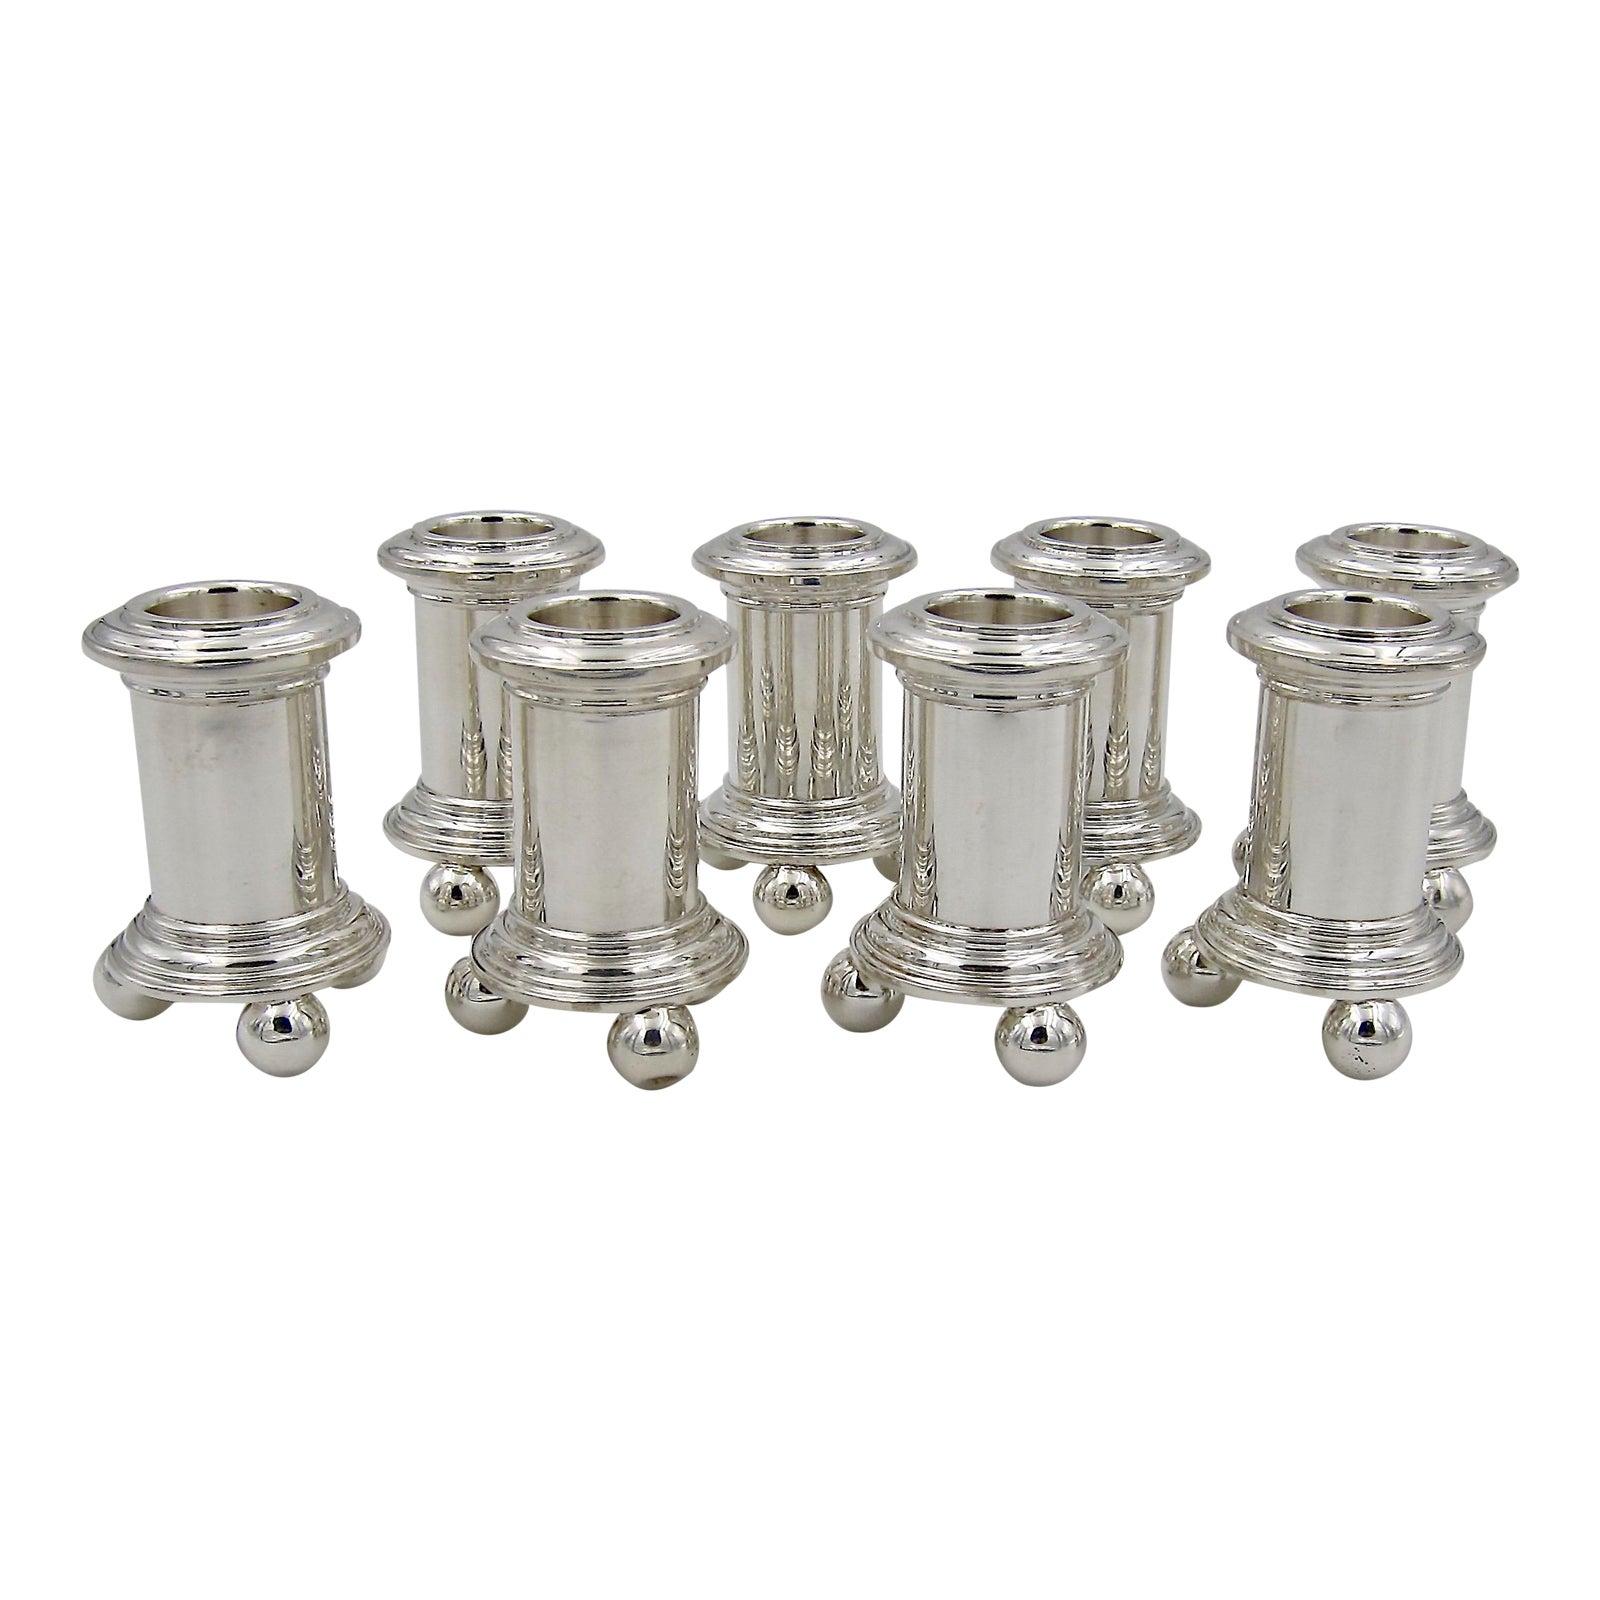 A set of eight sterling silver. Candleholders from Tiffany & Co. The vintage silver candlesticks hold standard size taper candles, the form resembles a column resting on a spreading stepped base supported by three ball feet.

The candleholders are